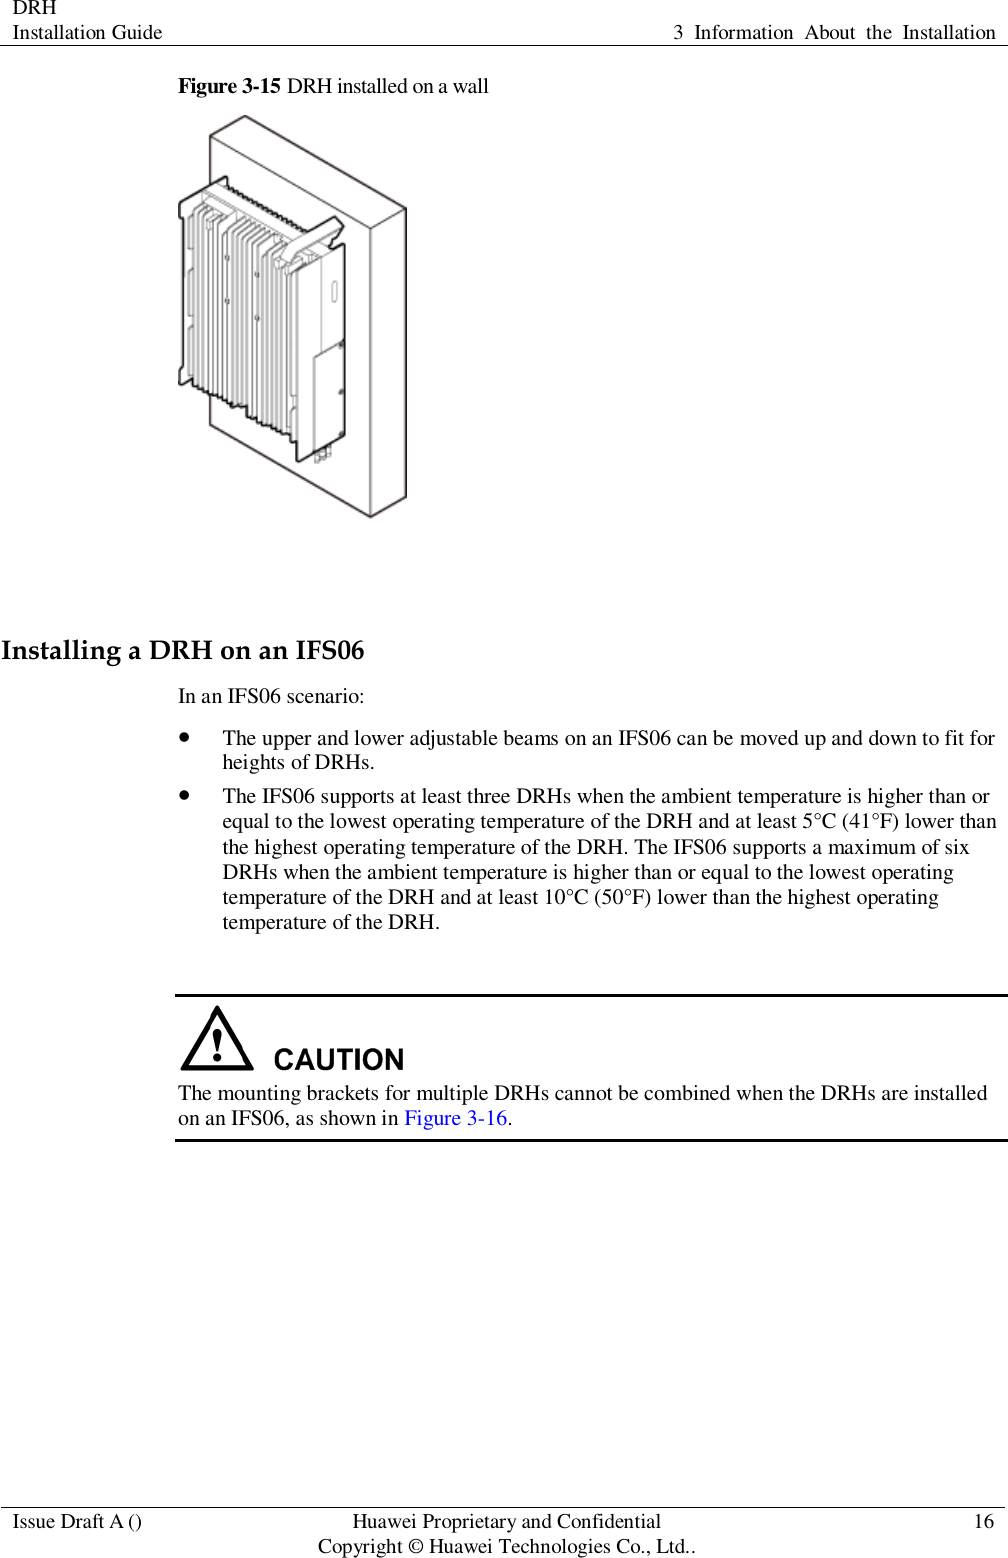 DRH   Installation Guide 3  Information  About  the  Installation  Issue Draft A () Huawei Proprietary and Confidential                                     Copyright © Huawei Technologies Co., Ltd.. 16  Figure 3-15 DRH installed on a wall   Installing a DRH on an IFS06 In an IFS06 scenario:  The upper and lower adjustable beams on an IFS06 can be moved up and down to fit for heights of DRHs.  The IFS06 supports at least three DRHs when the ambient temperature is higher than or equal to the lowest operating temperature of the DRH and at least 5°C (41°F) lower than the highest operating temperature of the DRH. The IFS06 supports a maximum of six DRHs when the ambient temperature is higher than or equal to the lowest operating temperature of the DRH and at least 10°C (50°F) lower than the highest operating temperature of the DRH.   The mounting brackets for multiple DRHs cannot be combined when the DRHs are installed on an IFS06, as shown in Figure 3-16. 